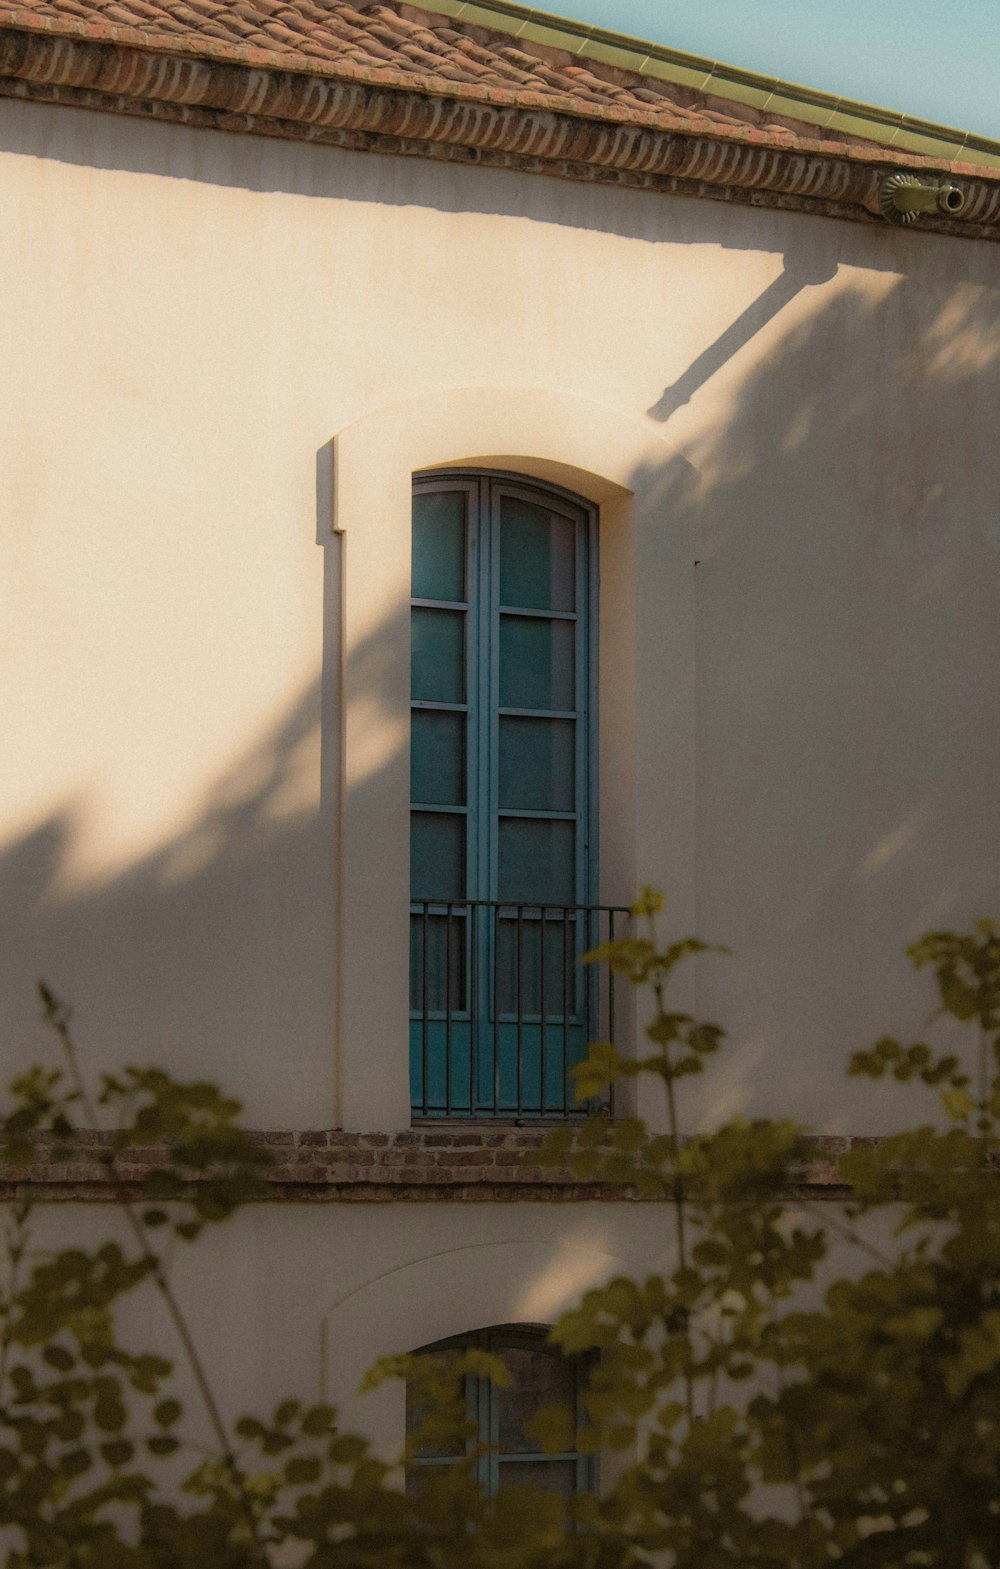 a white building with a blue window and green shutters